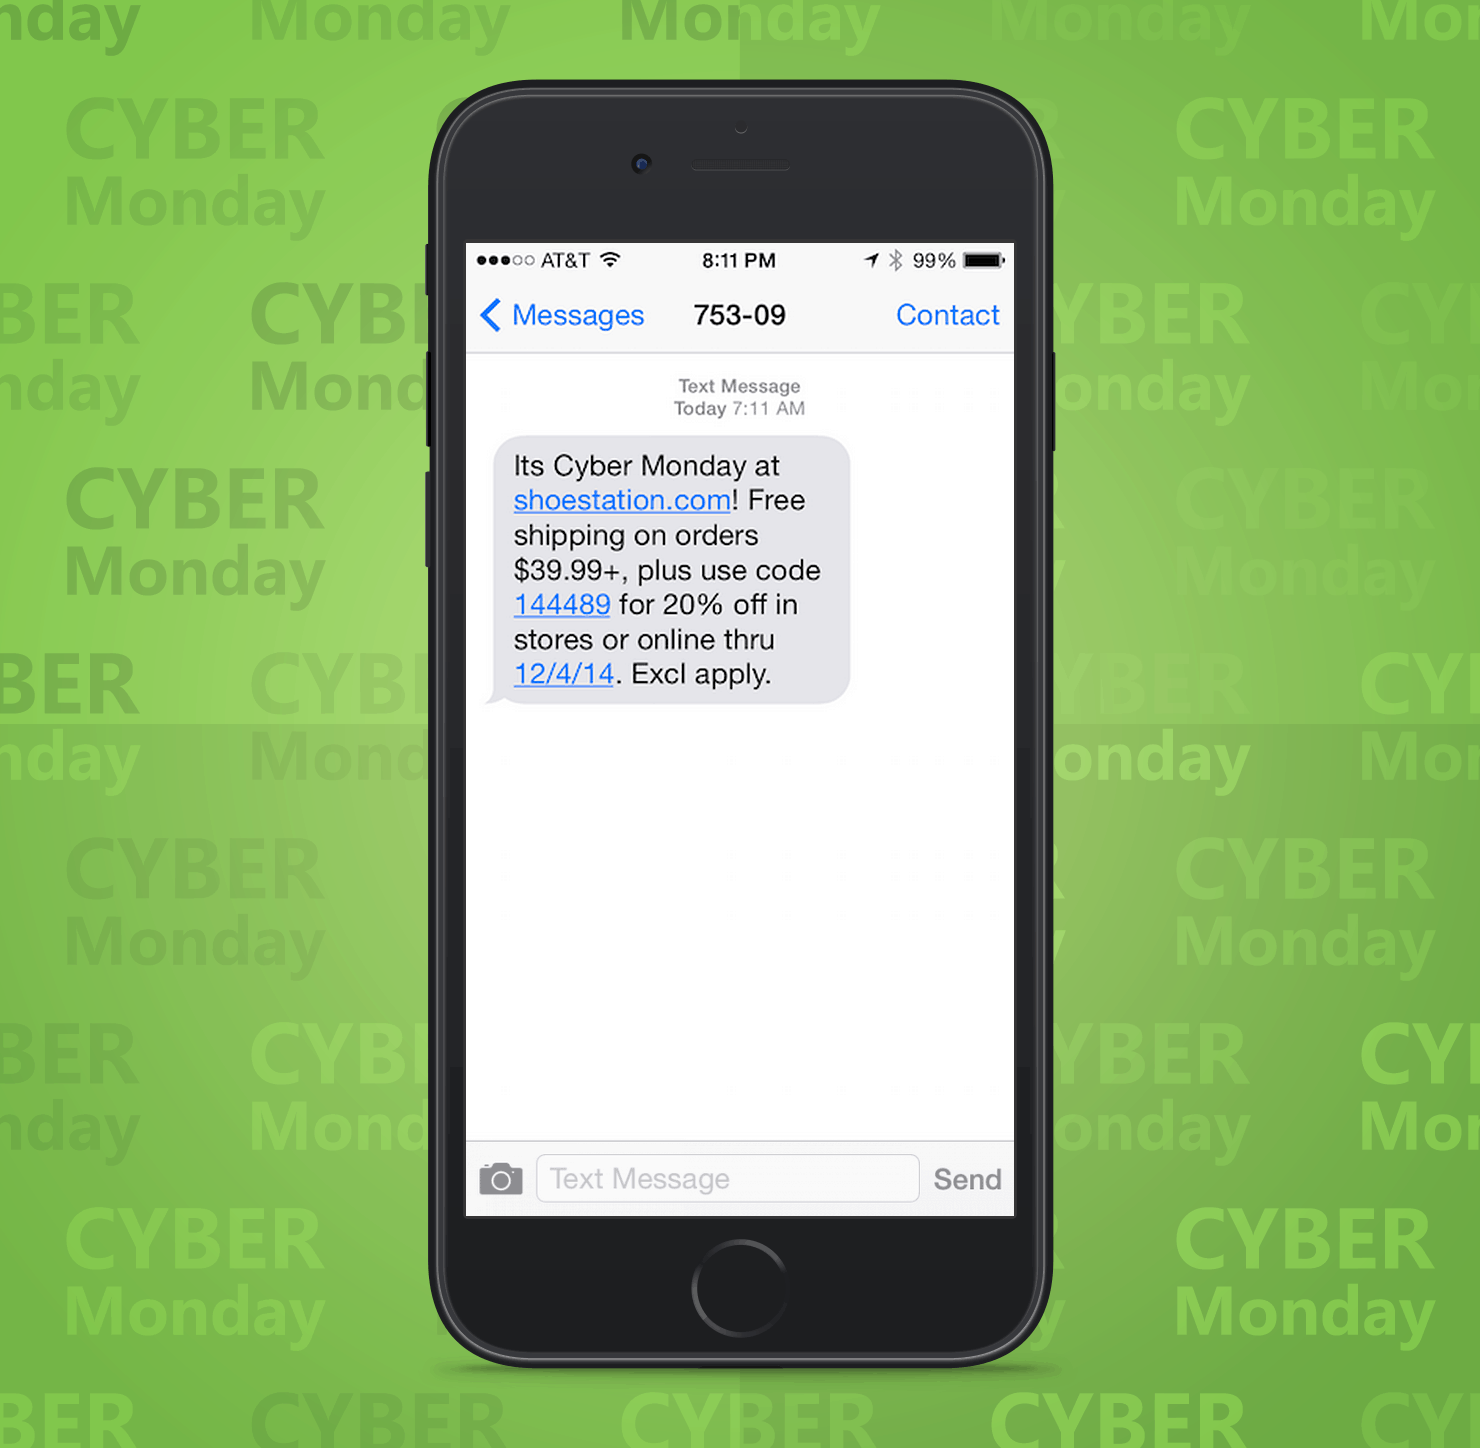 SMS Coupon Example Sent on Cyber Monday From Shoestation to Customers